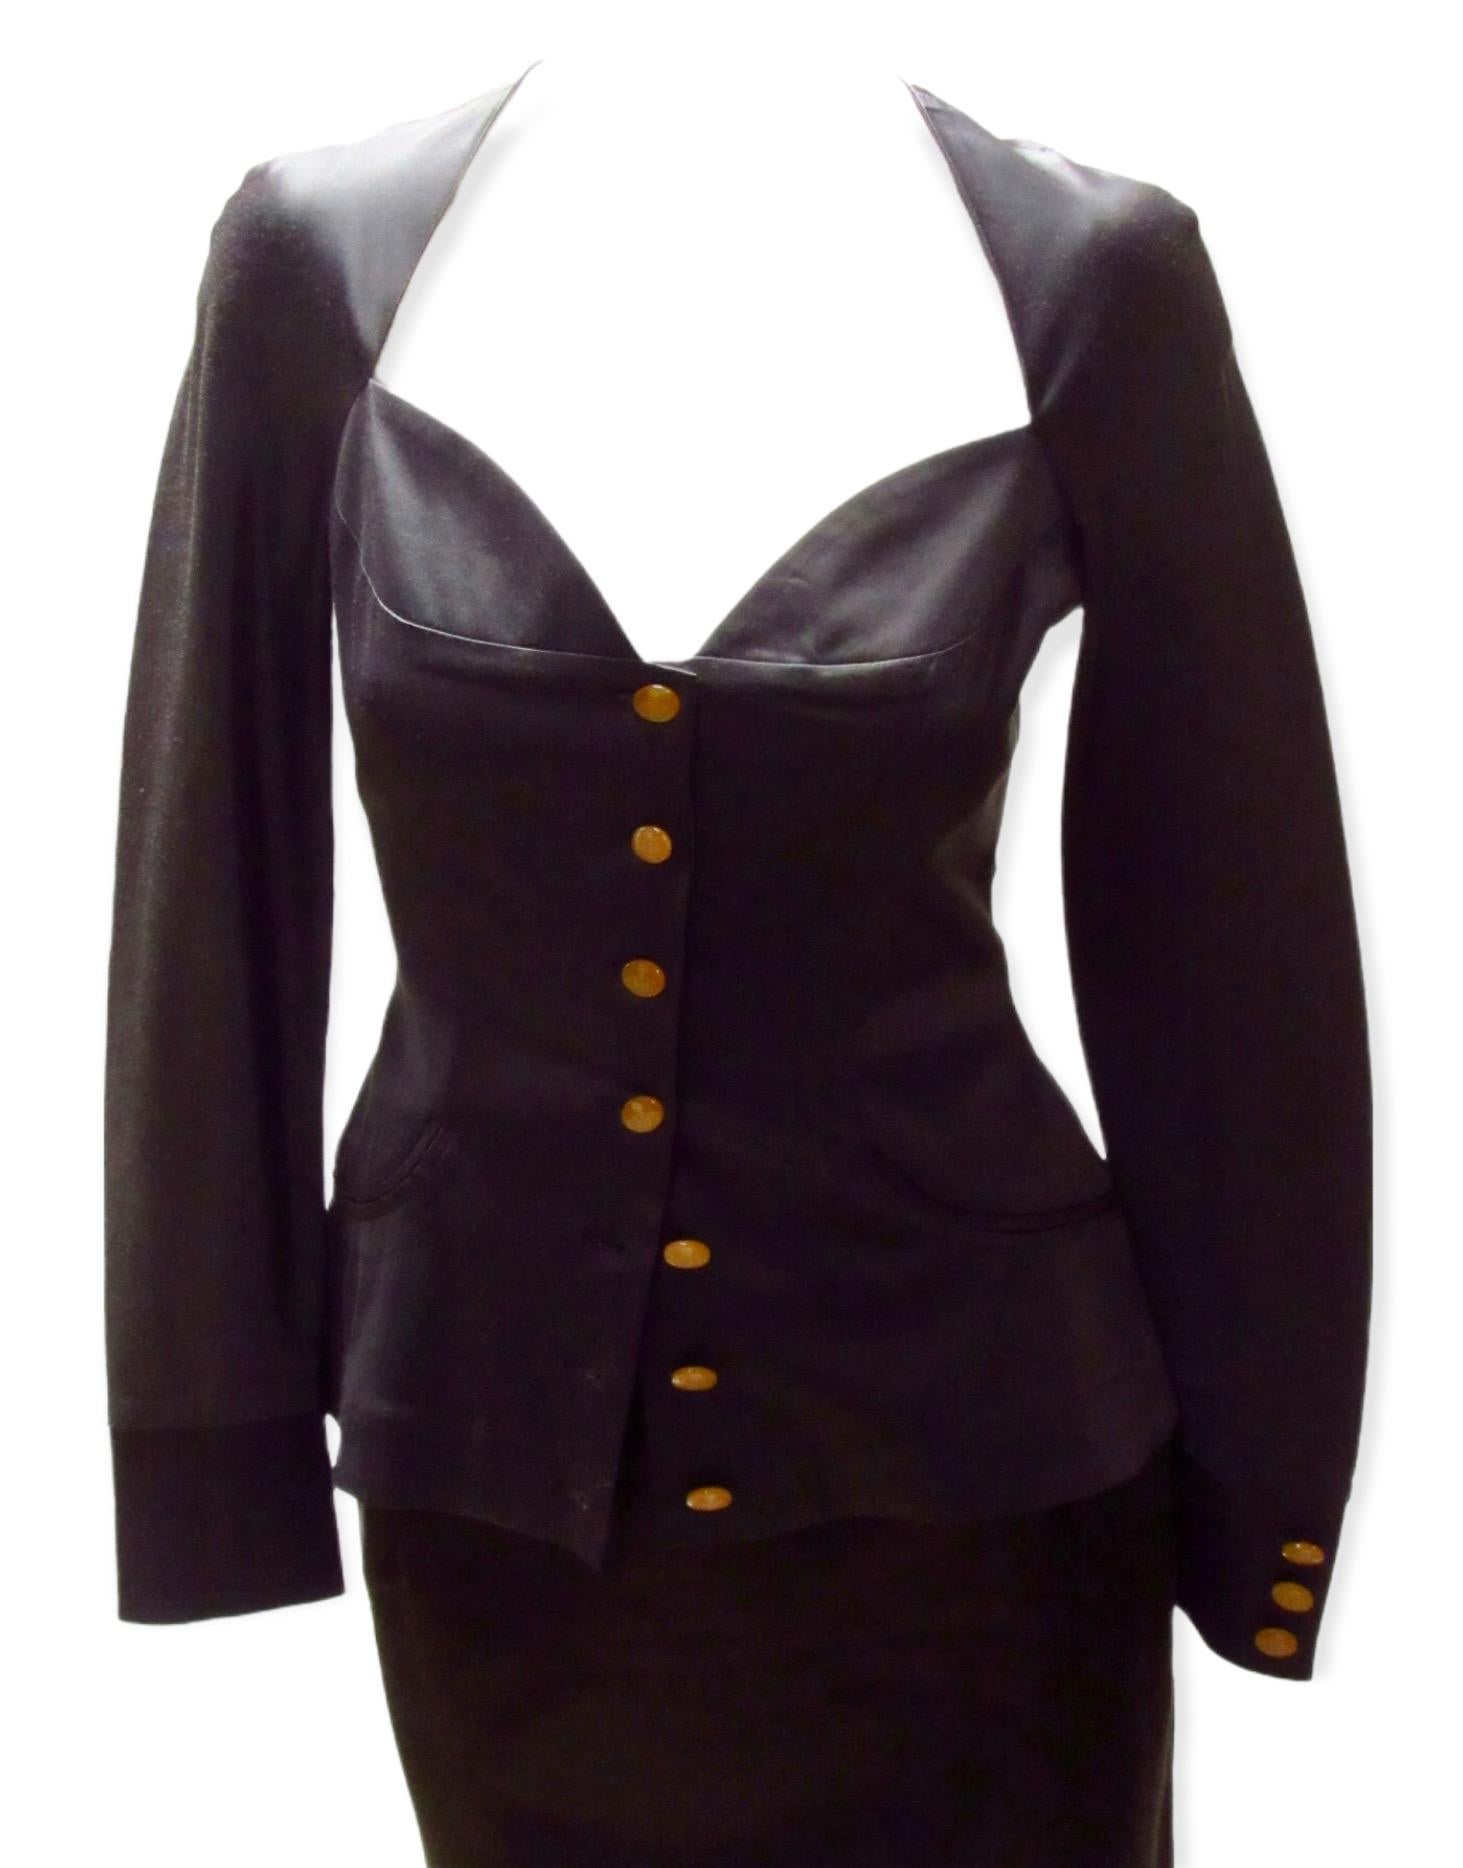 Beautifully tailored black jacket from vintage Vivienne Westwood. With a sweetheart neckline,  this ultra feminine satiny soft jacket fastens with signature logo buttons. Small front waistline pockets and buttoned cuffs.